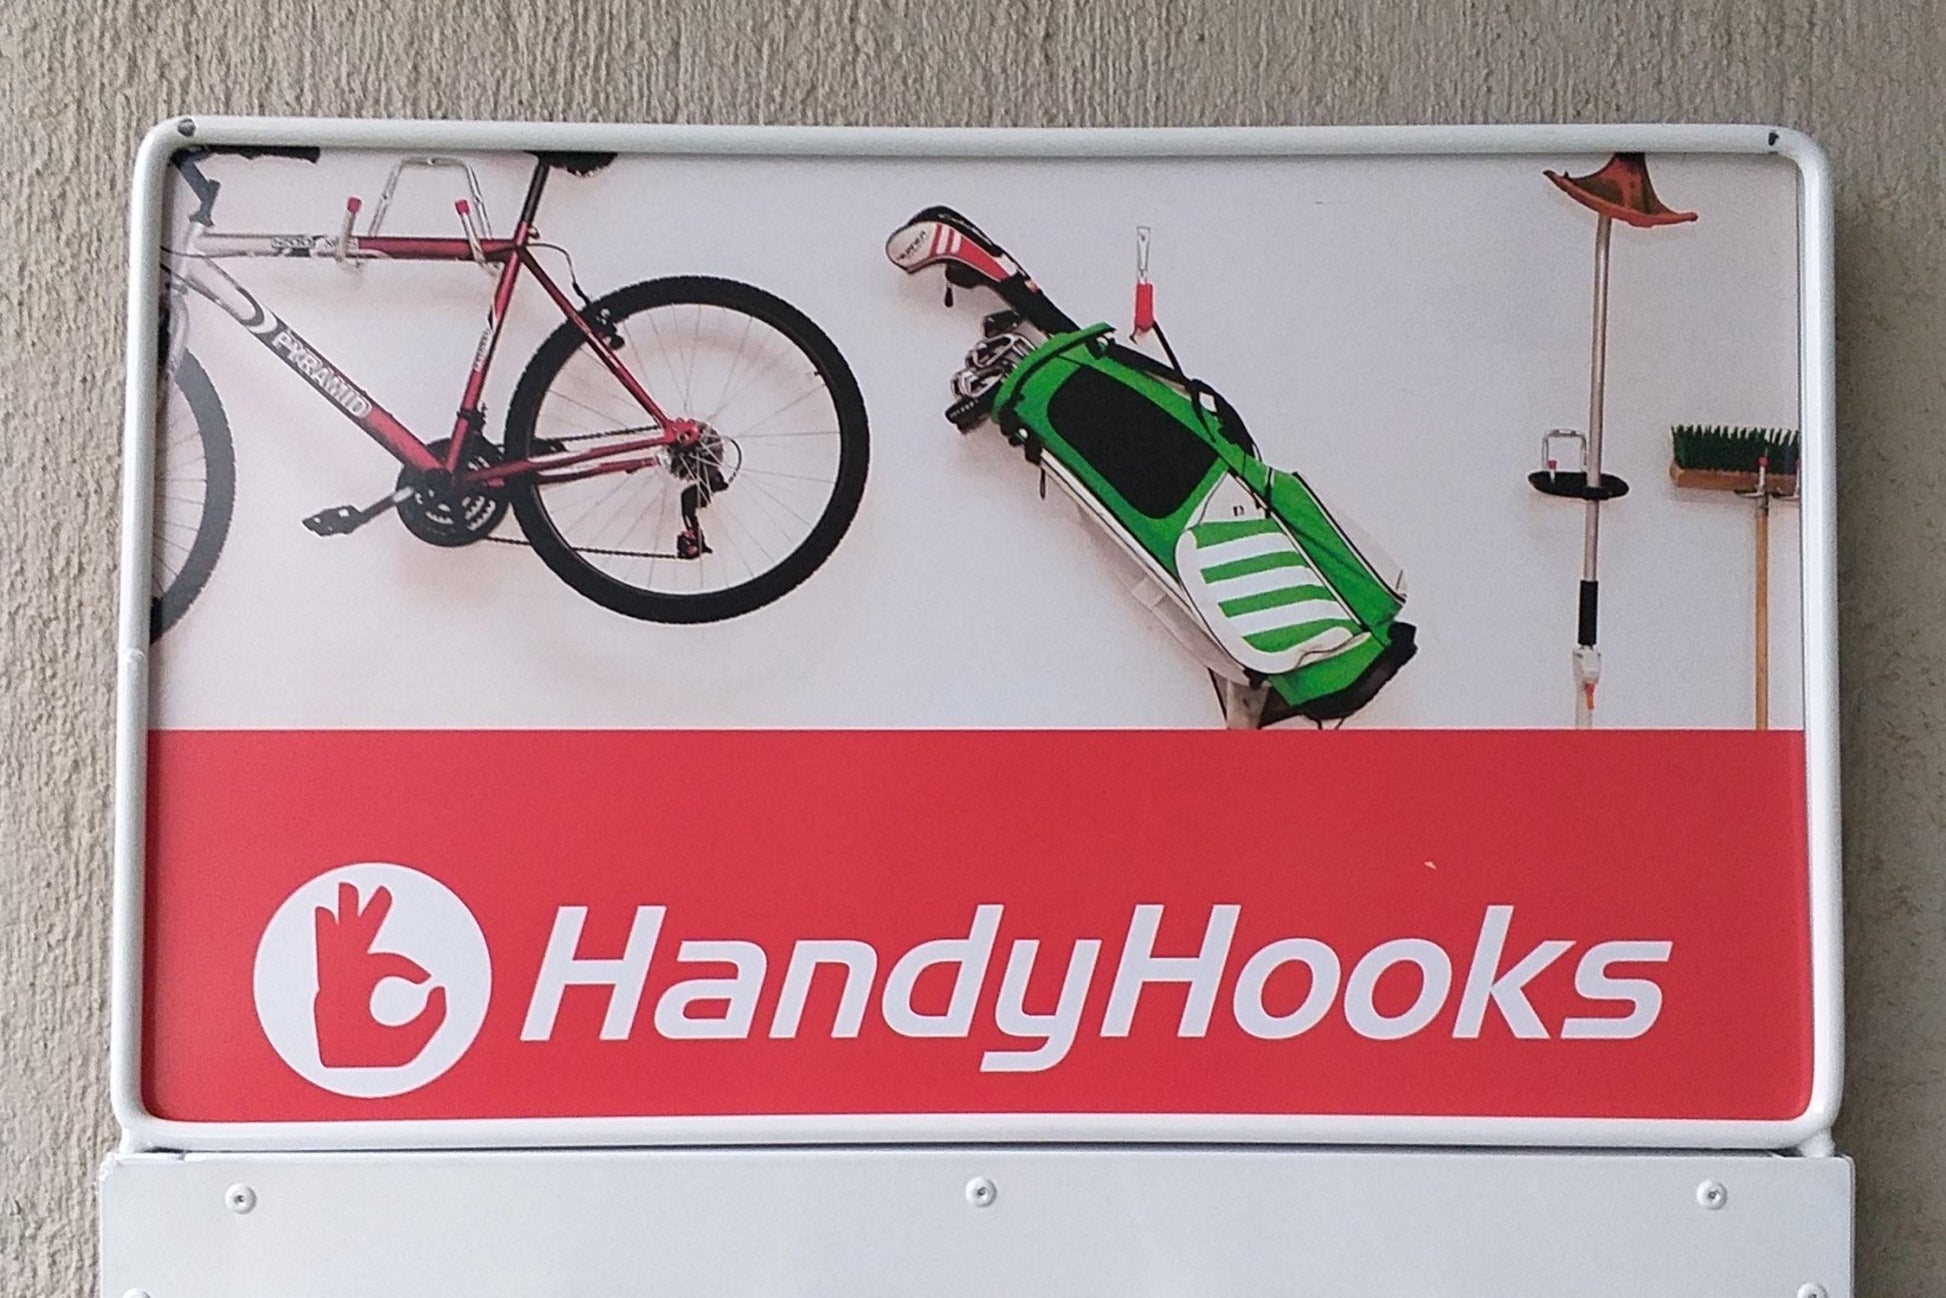 Handy Hooks - Coated Wall Bracket - The easy to install storage solution - Lifespace